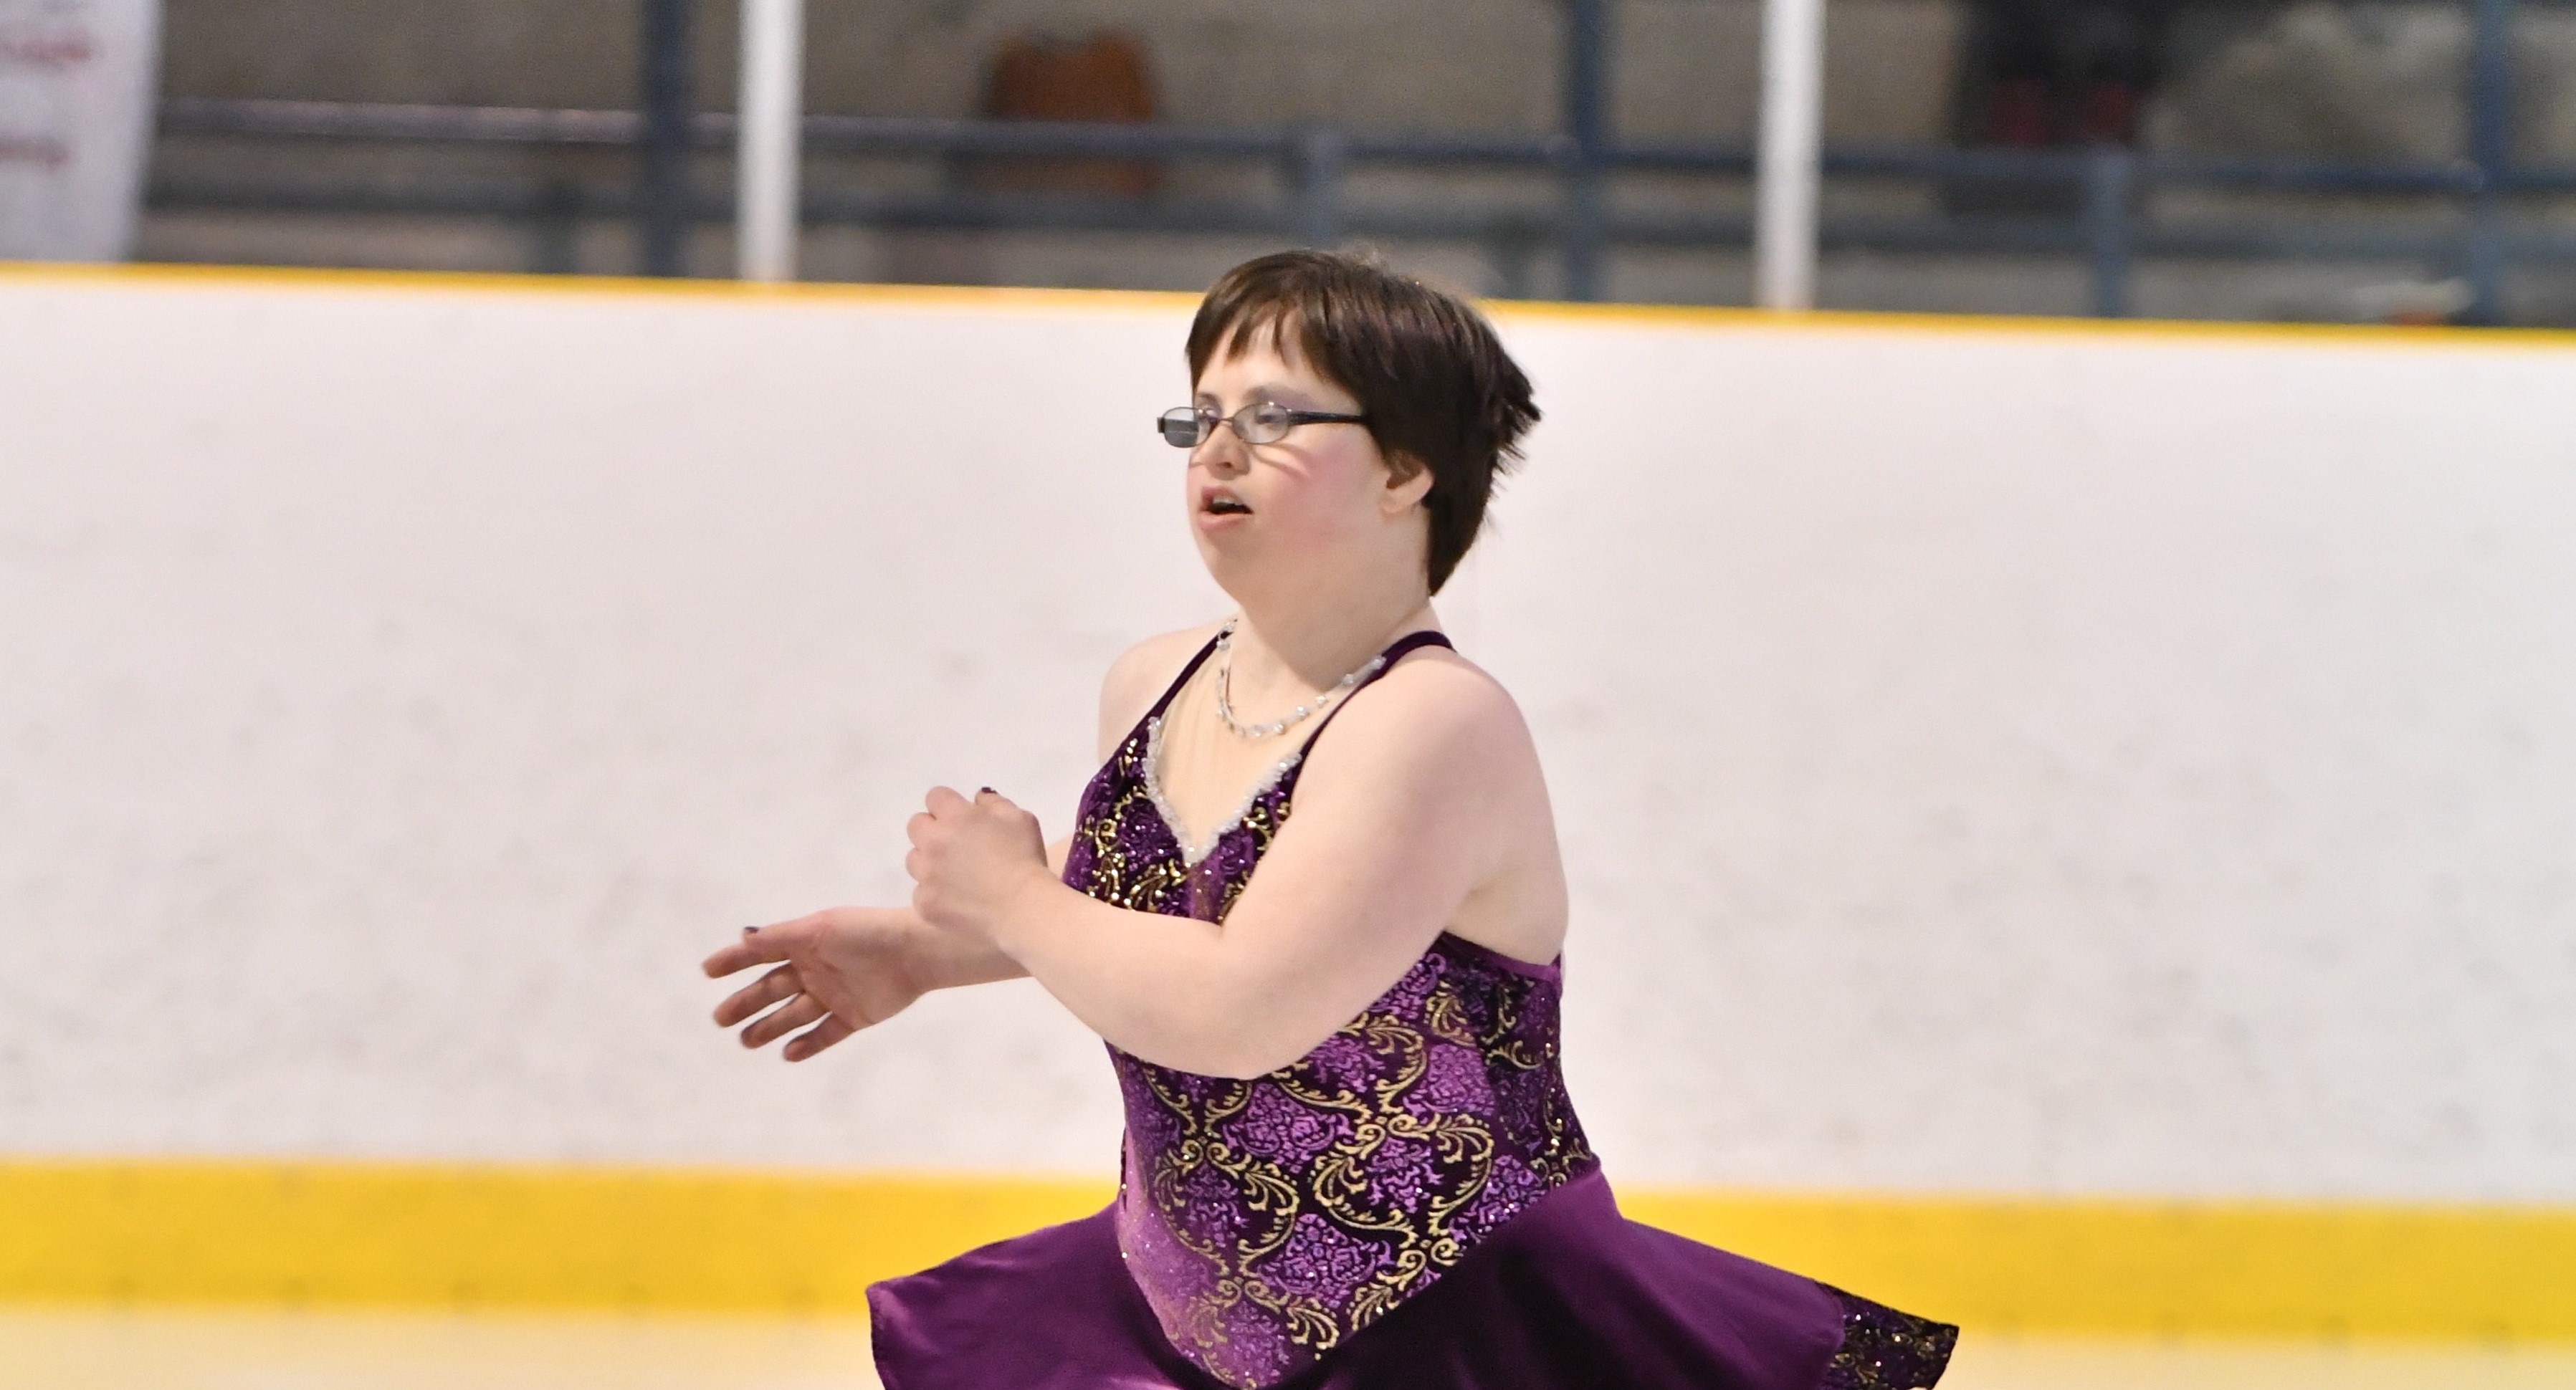 Meet Danielle Waters Special Olympics Ontario athlete performing at